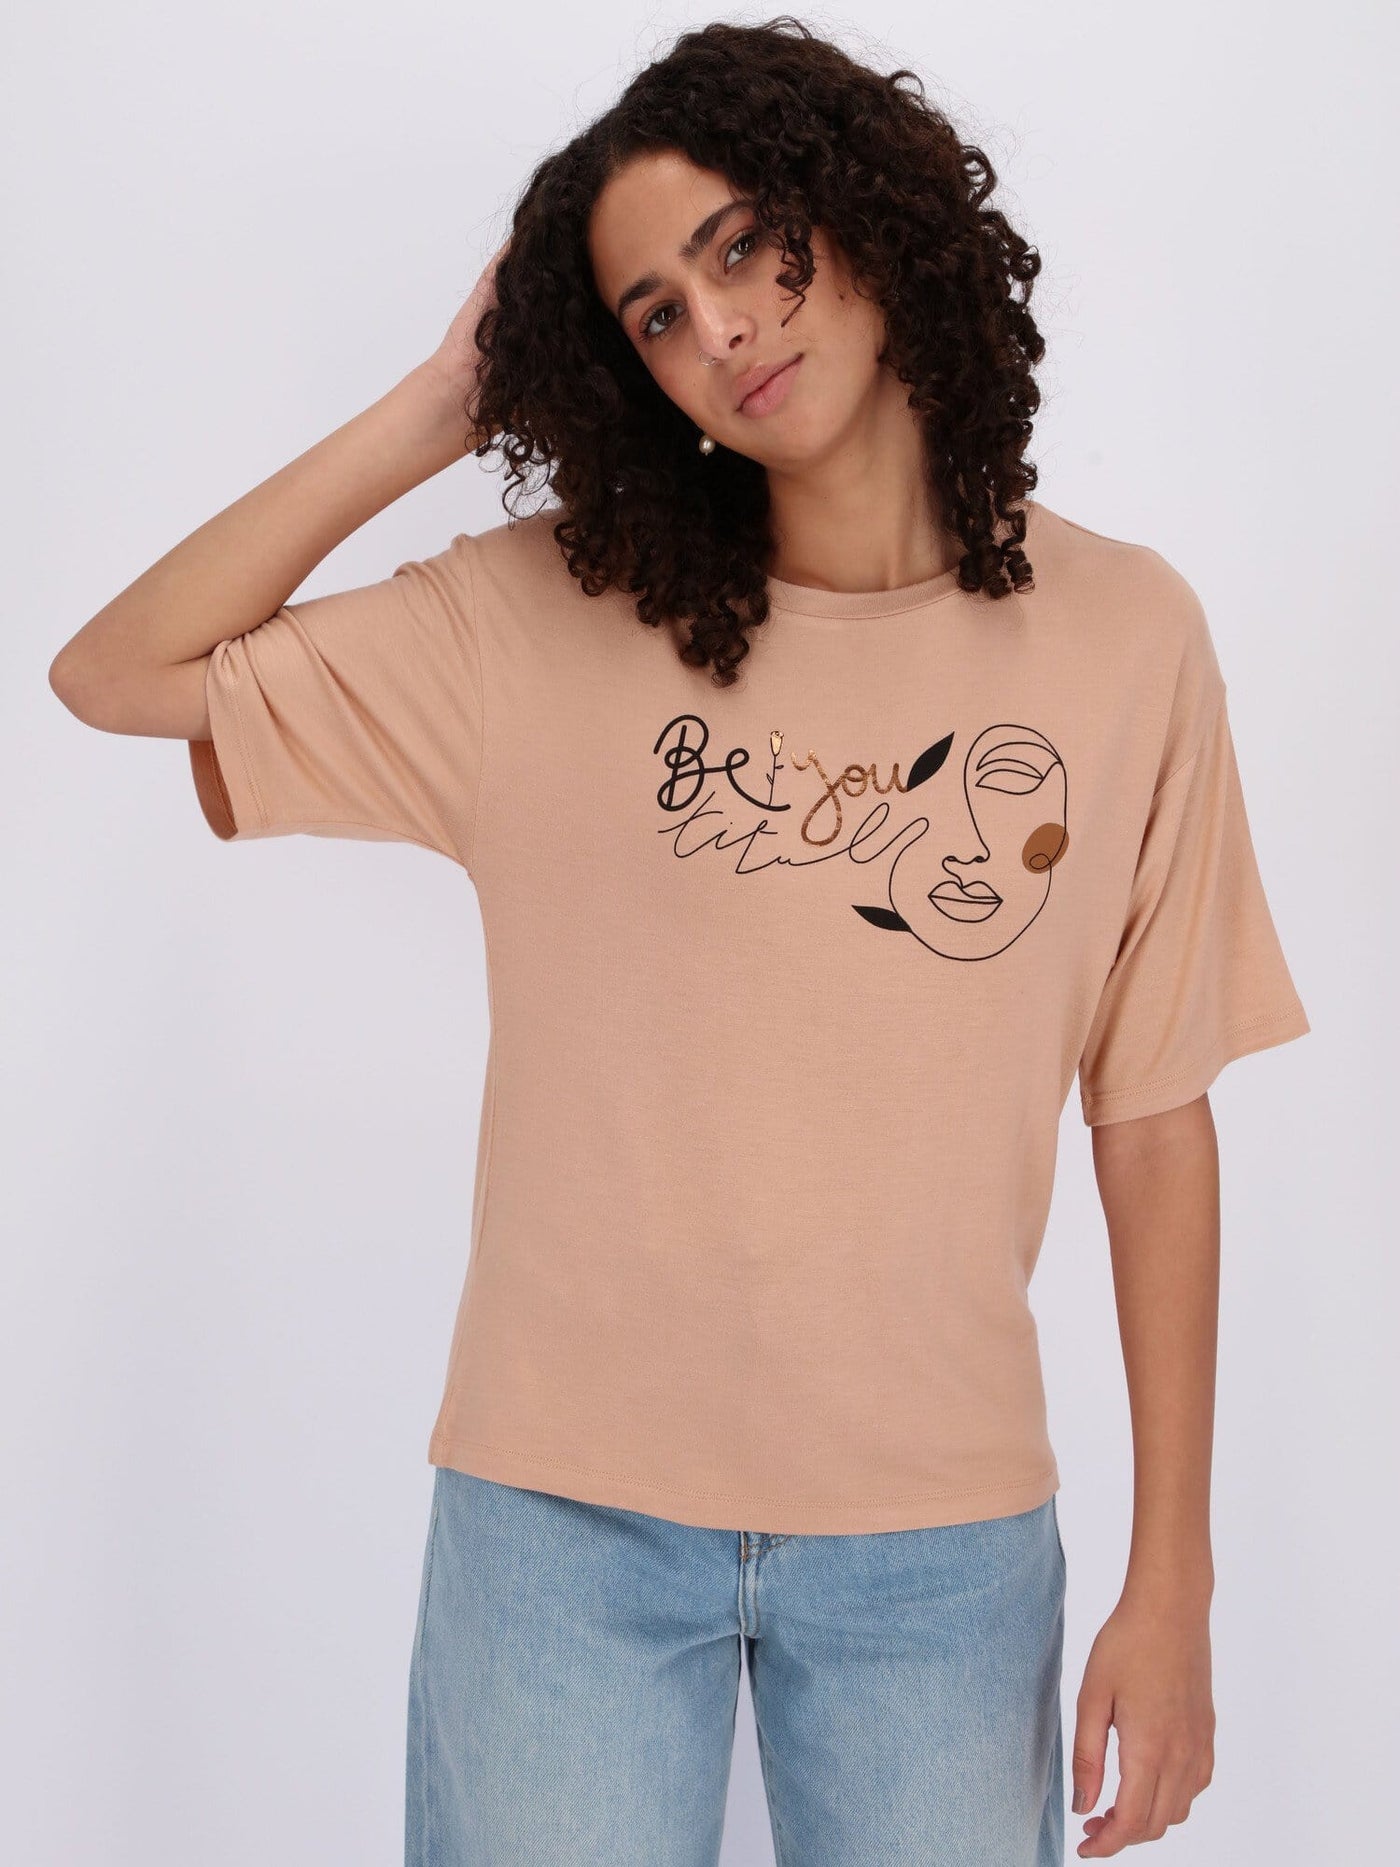 OR Tops & Blouses Front Text Print Friday-Ish Short Sleeve T-Shirt